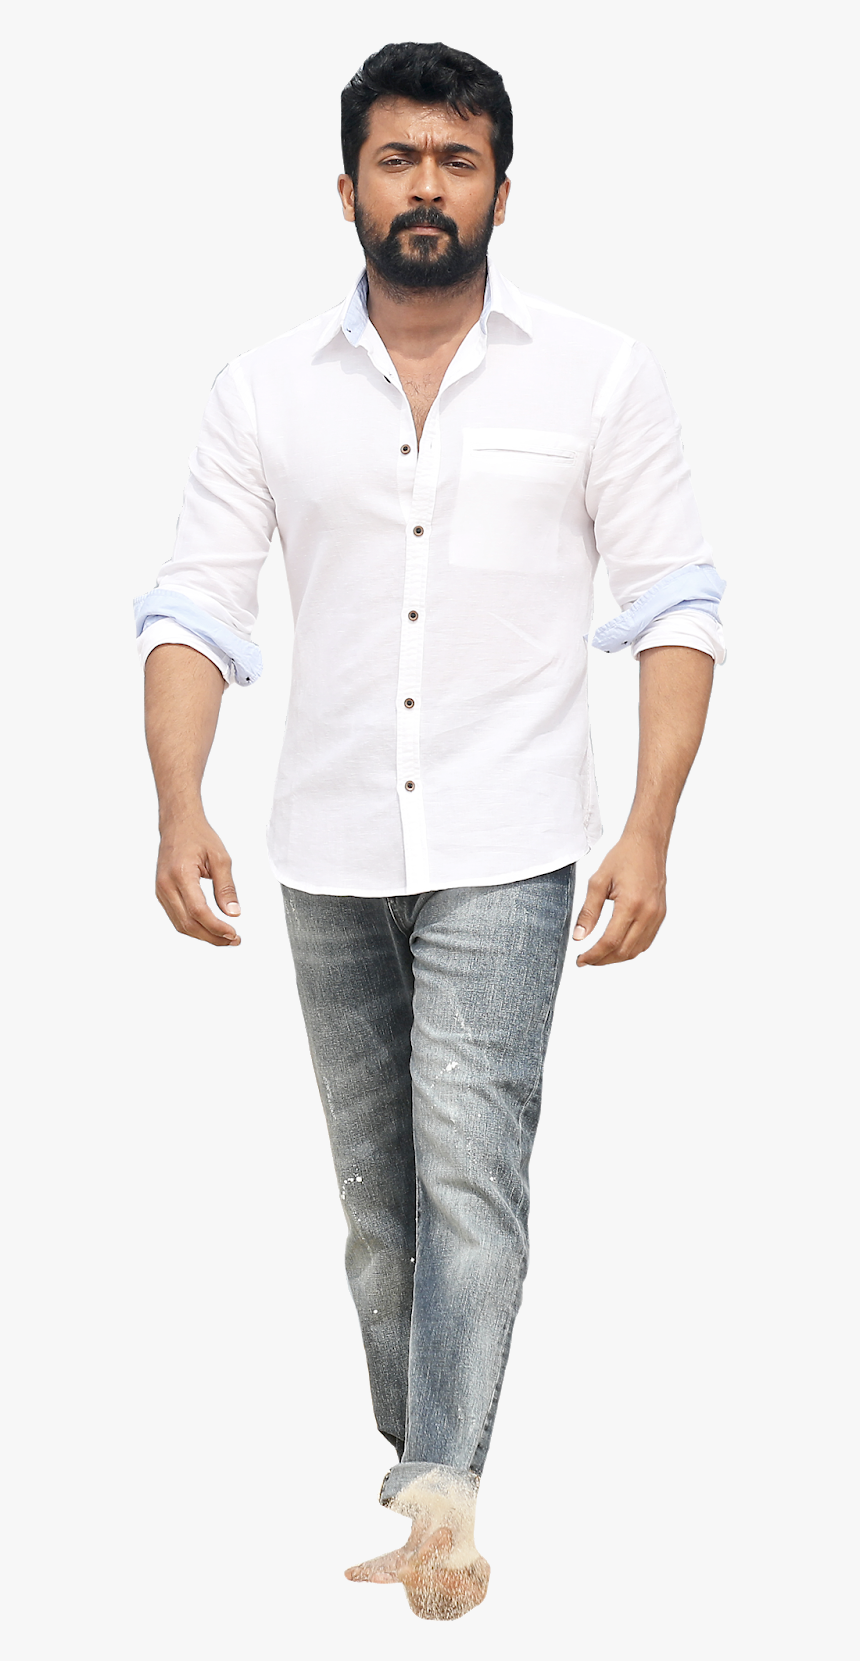 Surya ngk ultra hd png stickers and